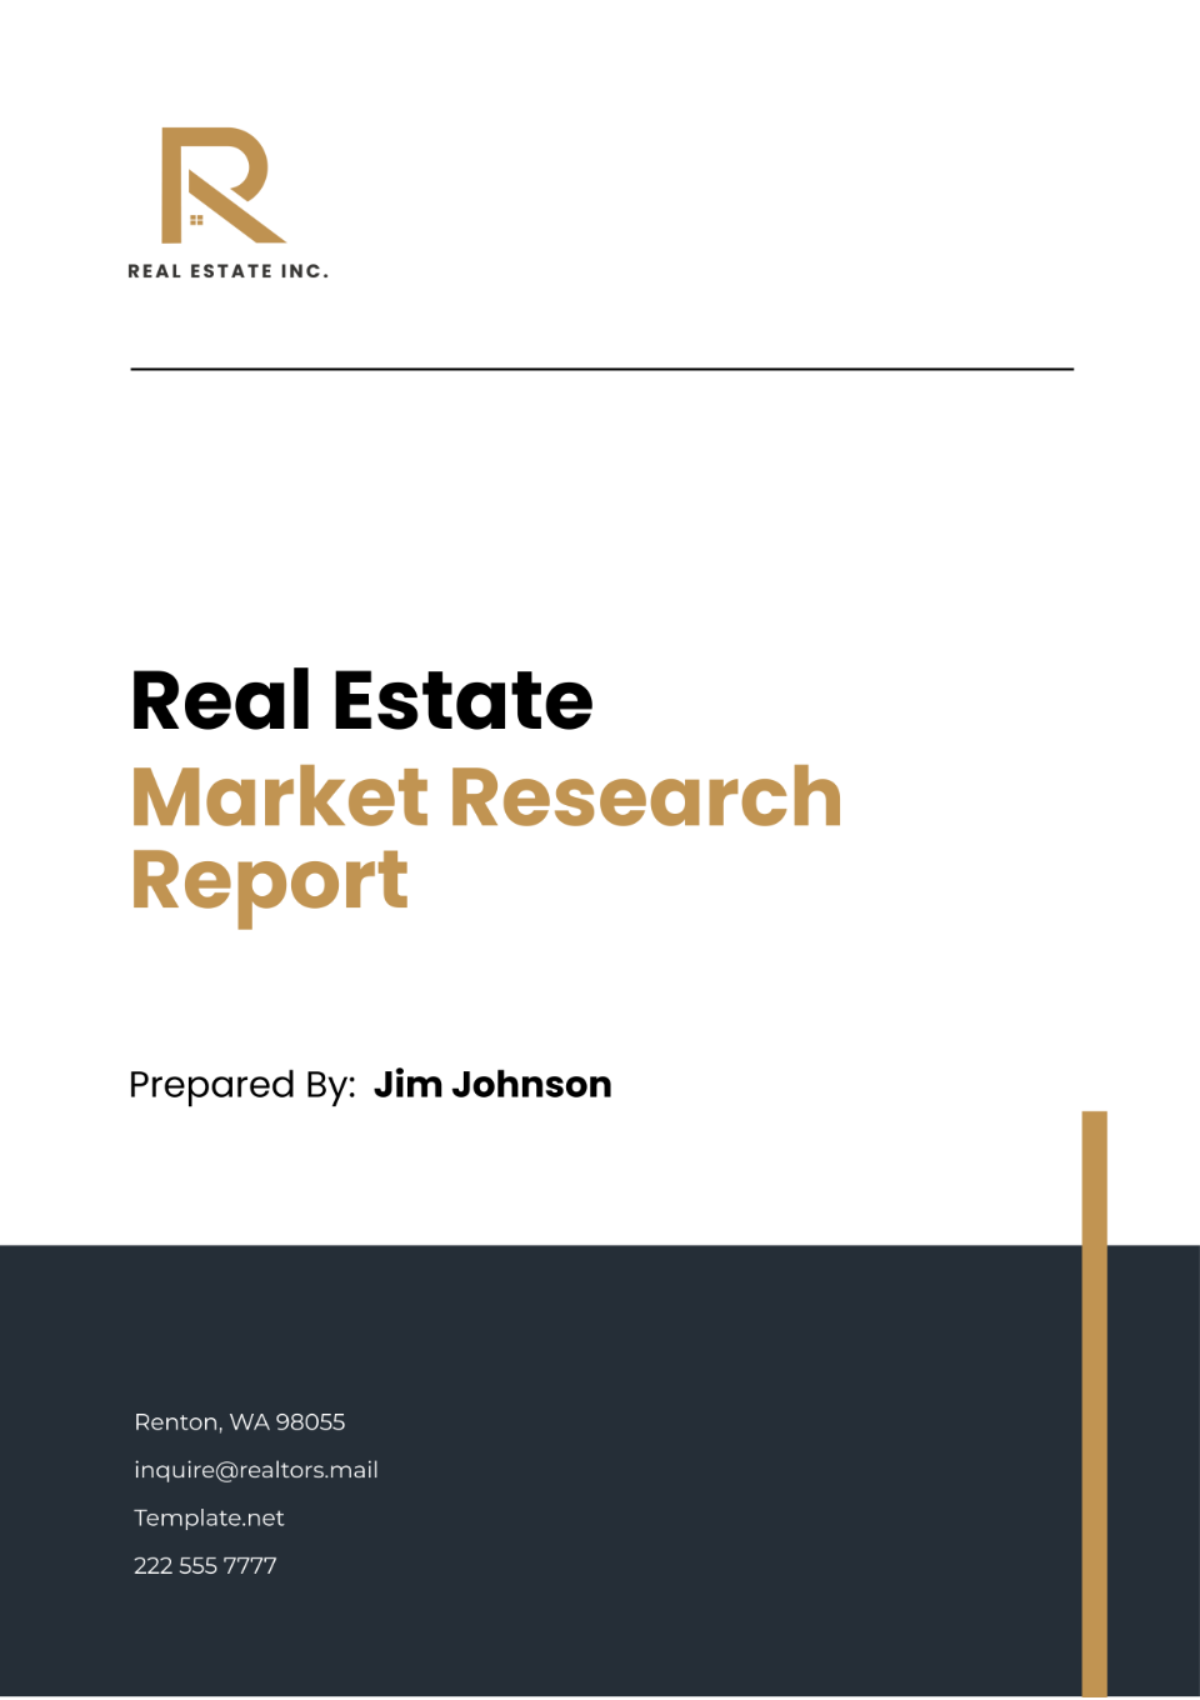 Free Real Estate Market Research Report Template